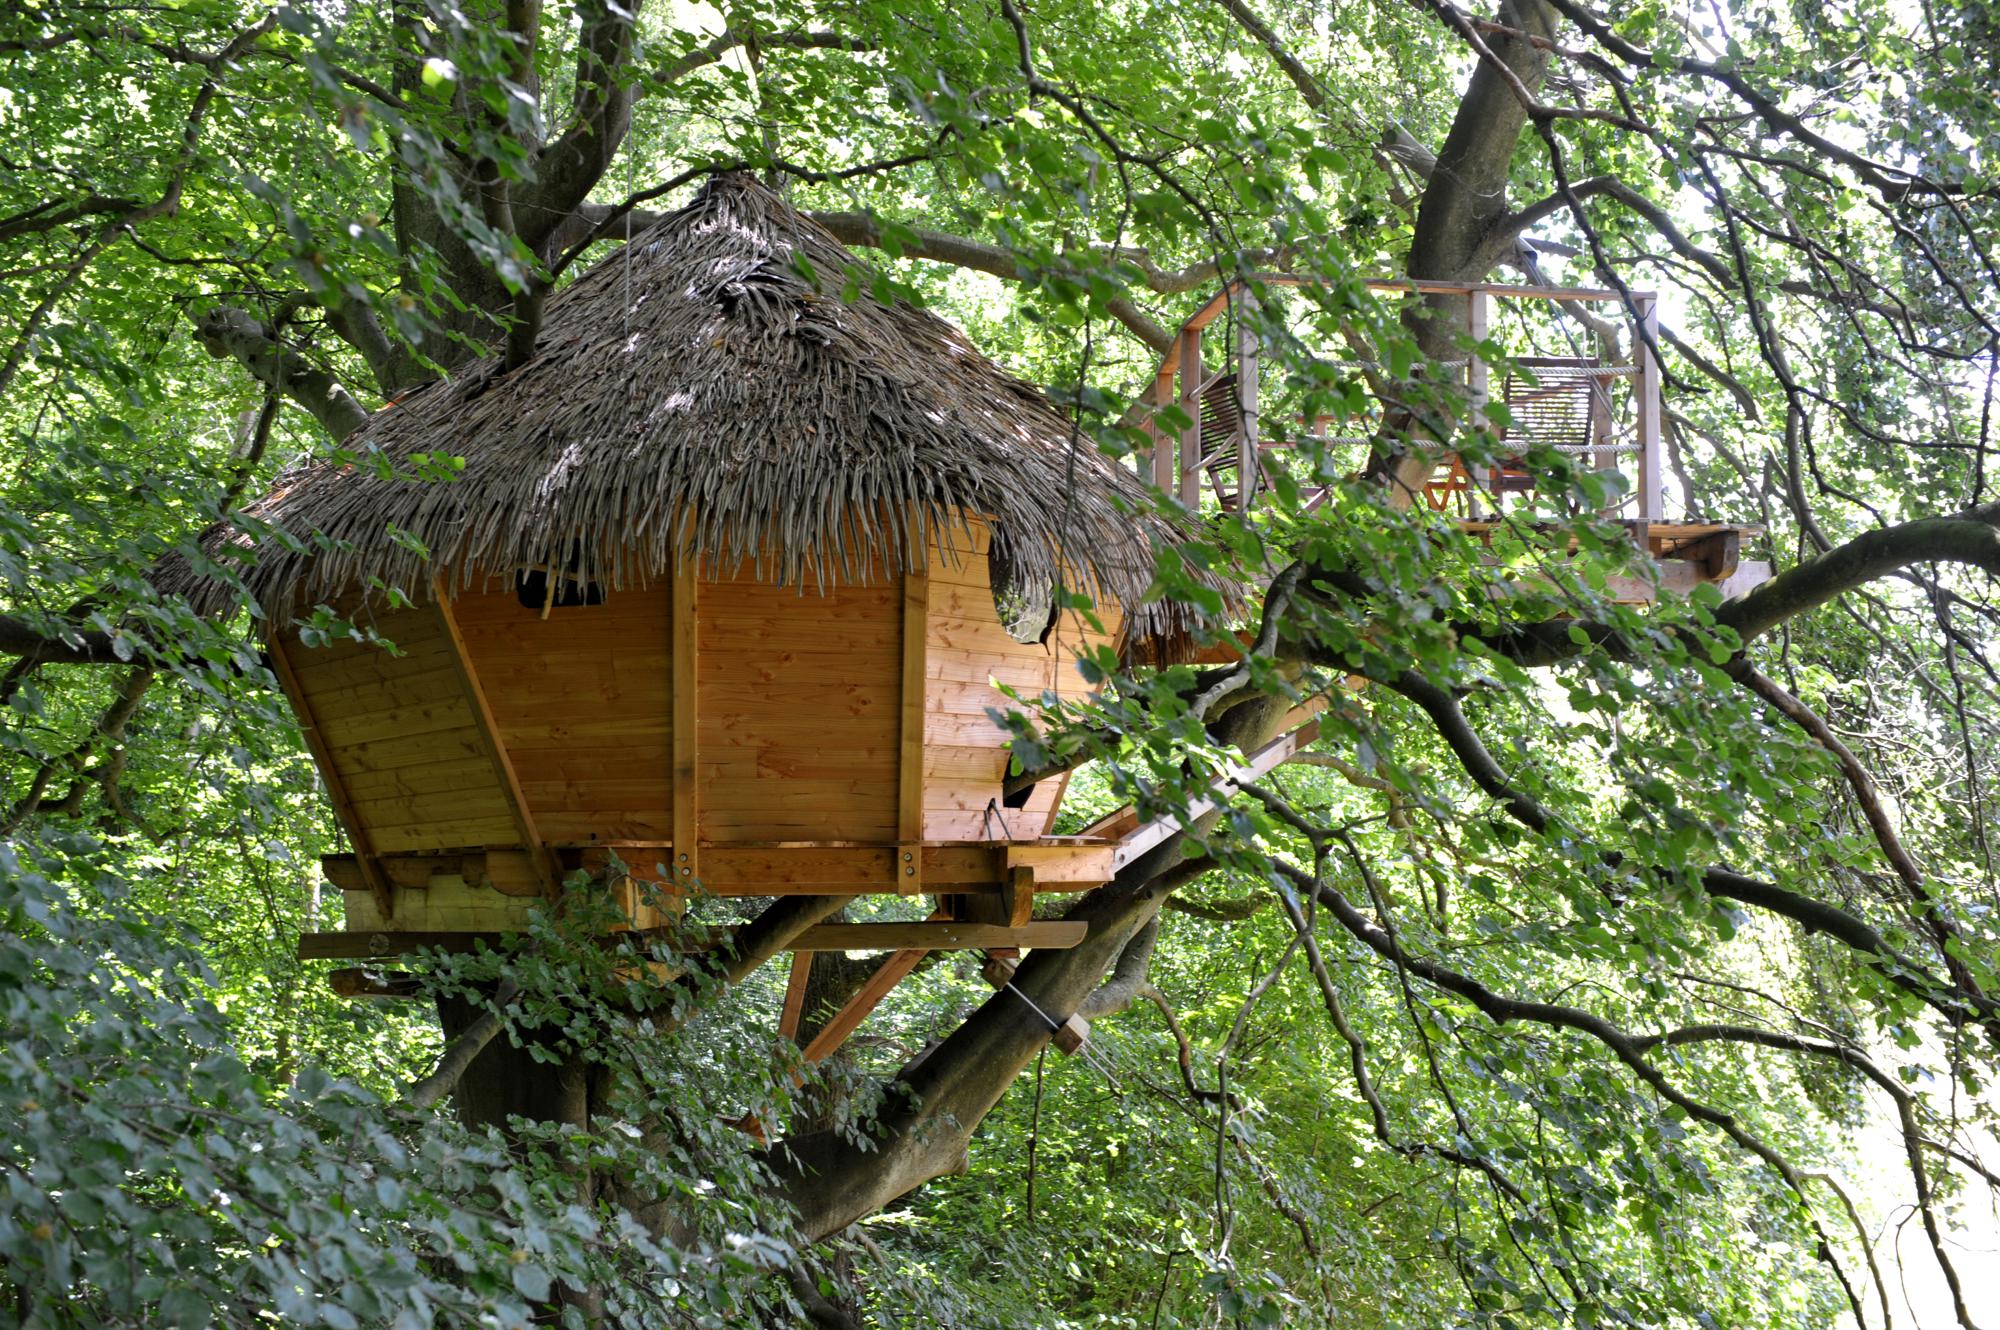 Glamping in Tree house – Cool Camping